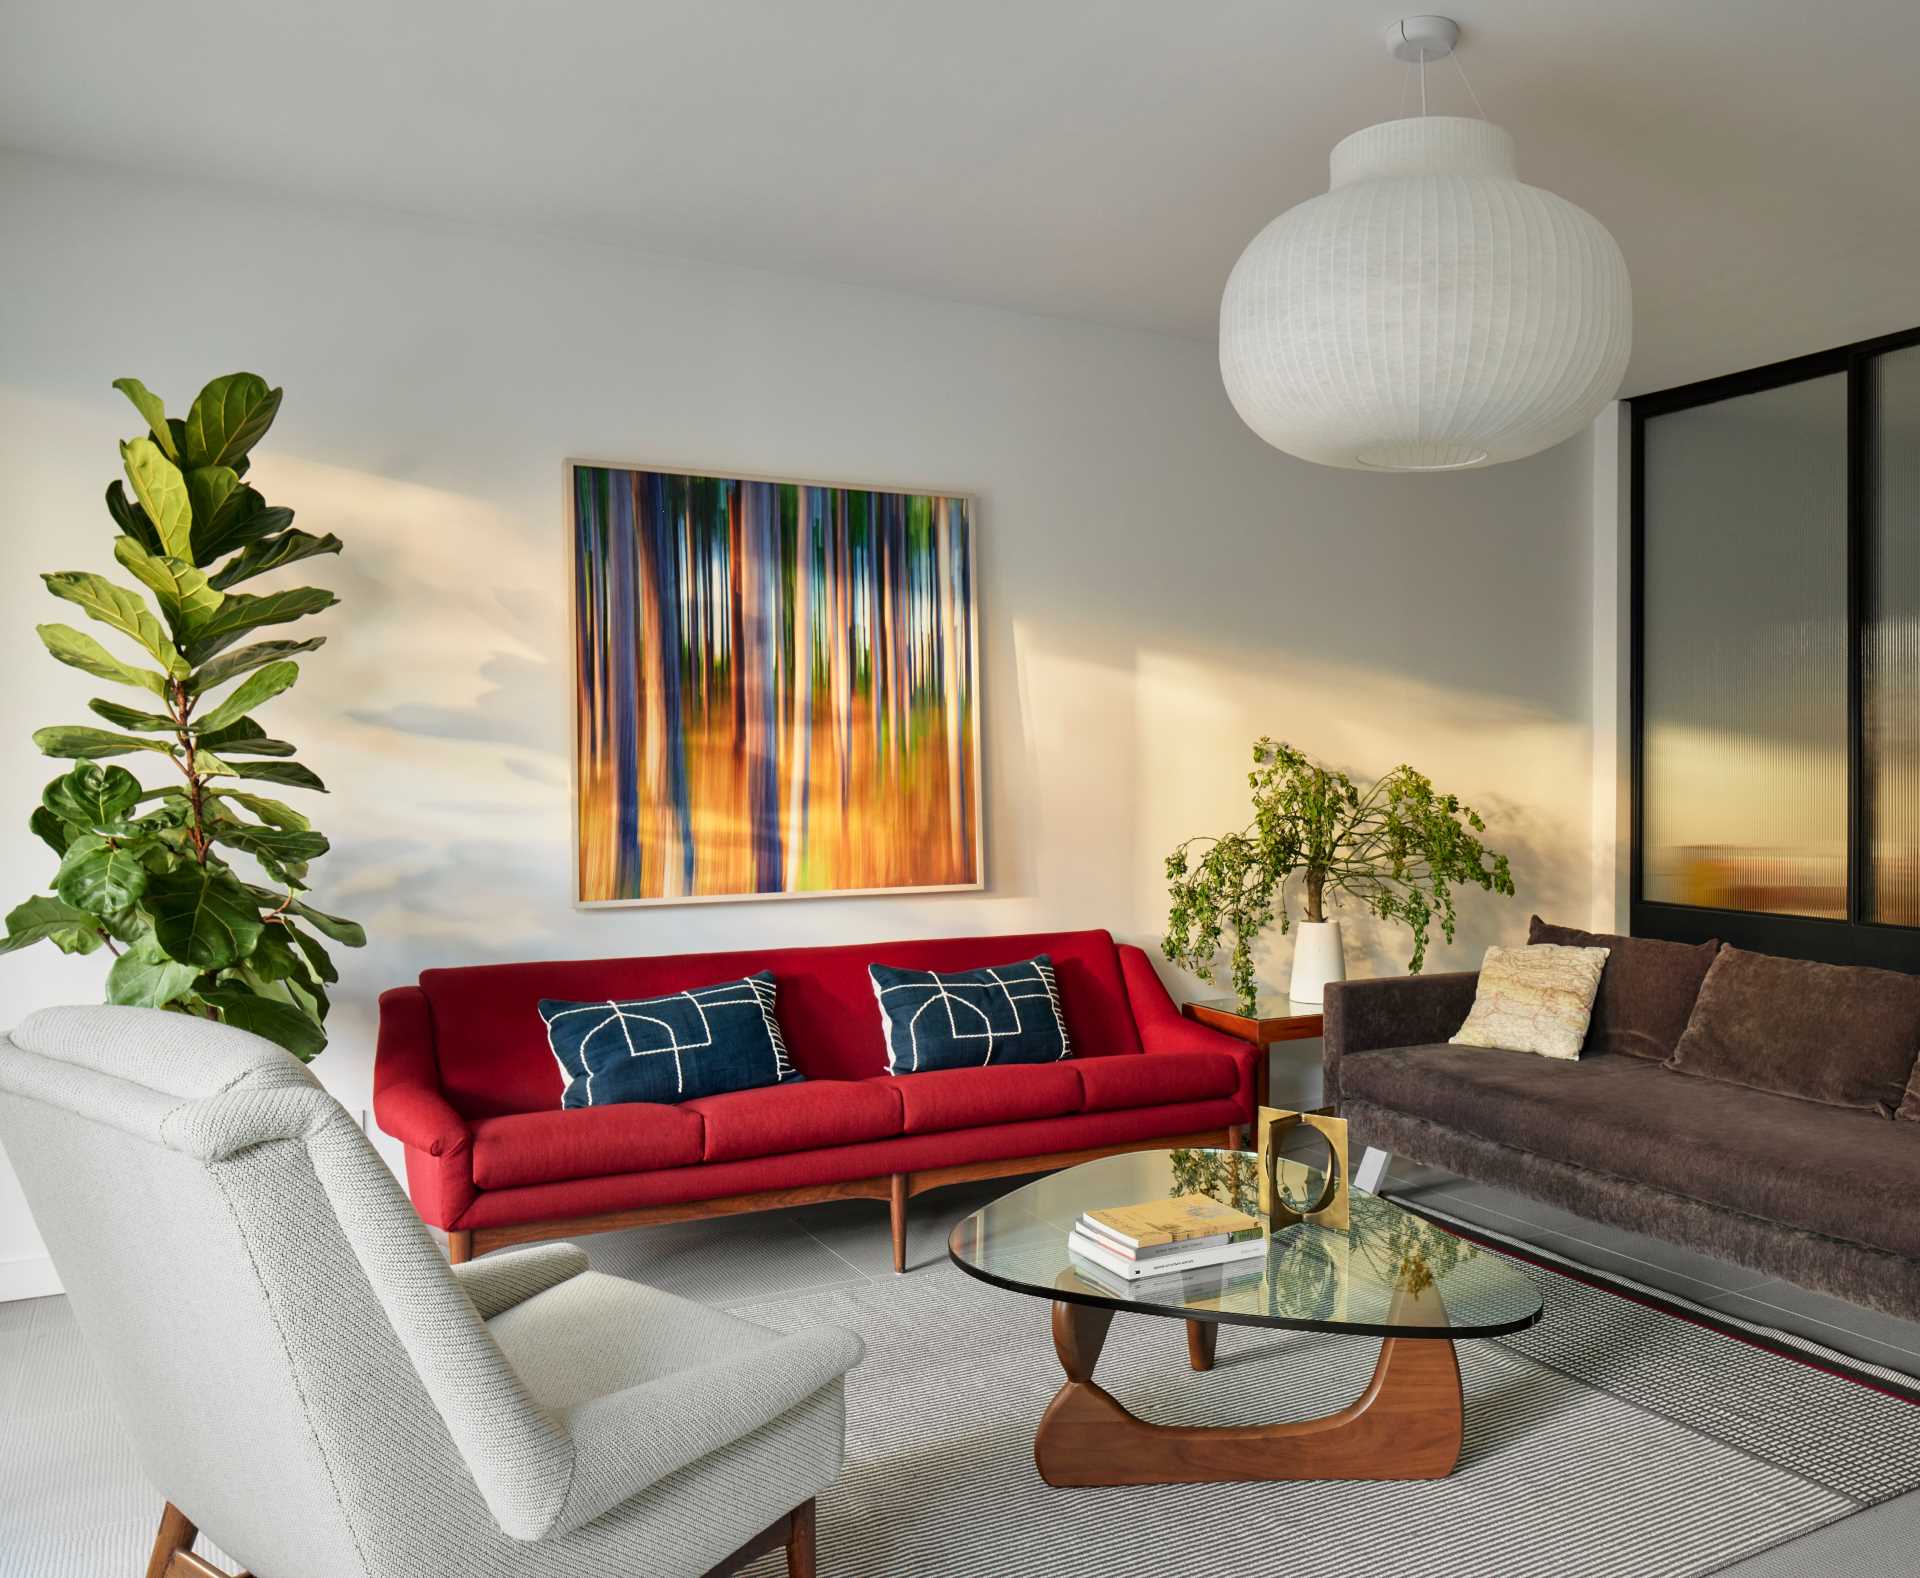 A modern basement living room with a bright red couch and colourful artwork.